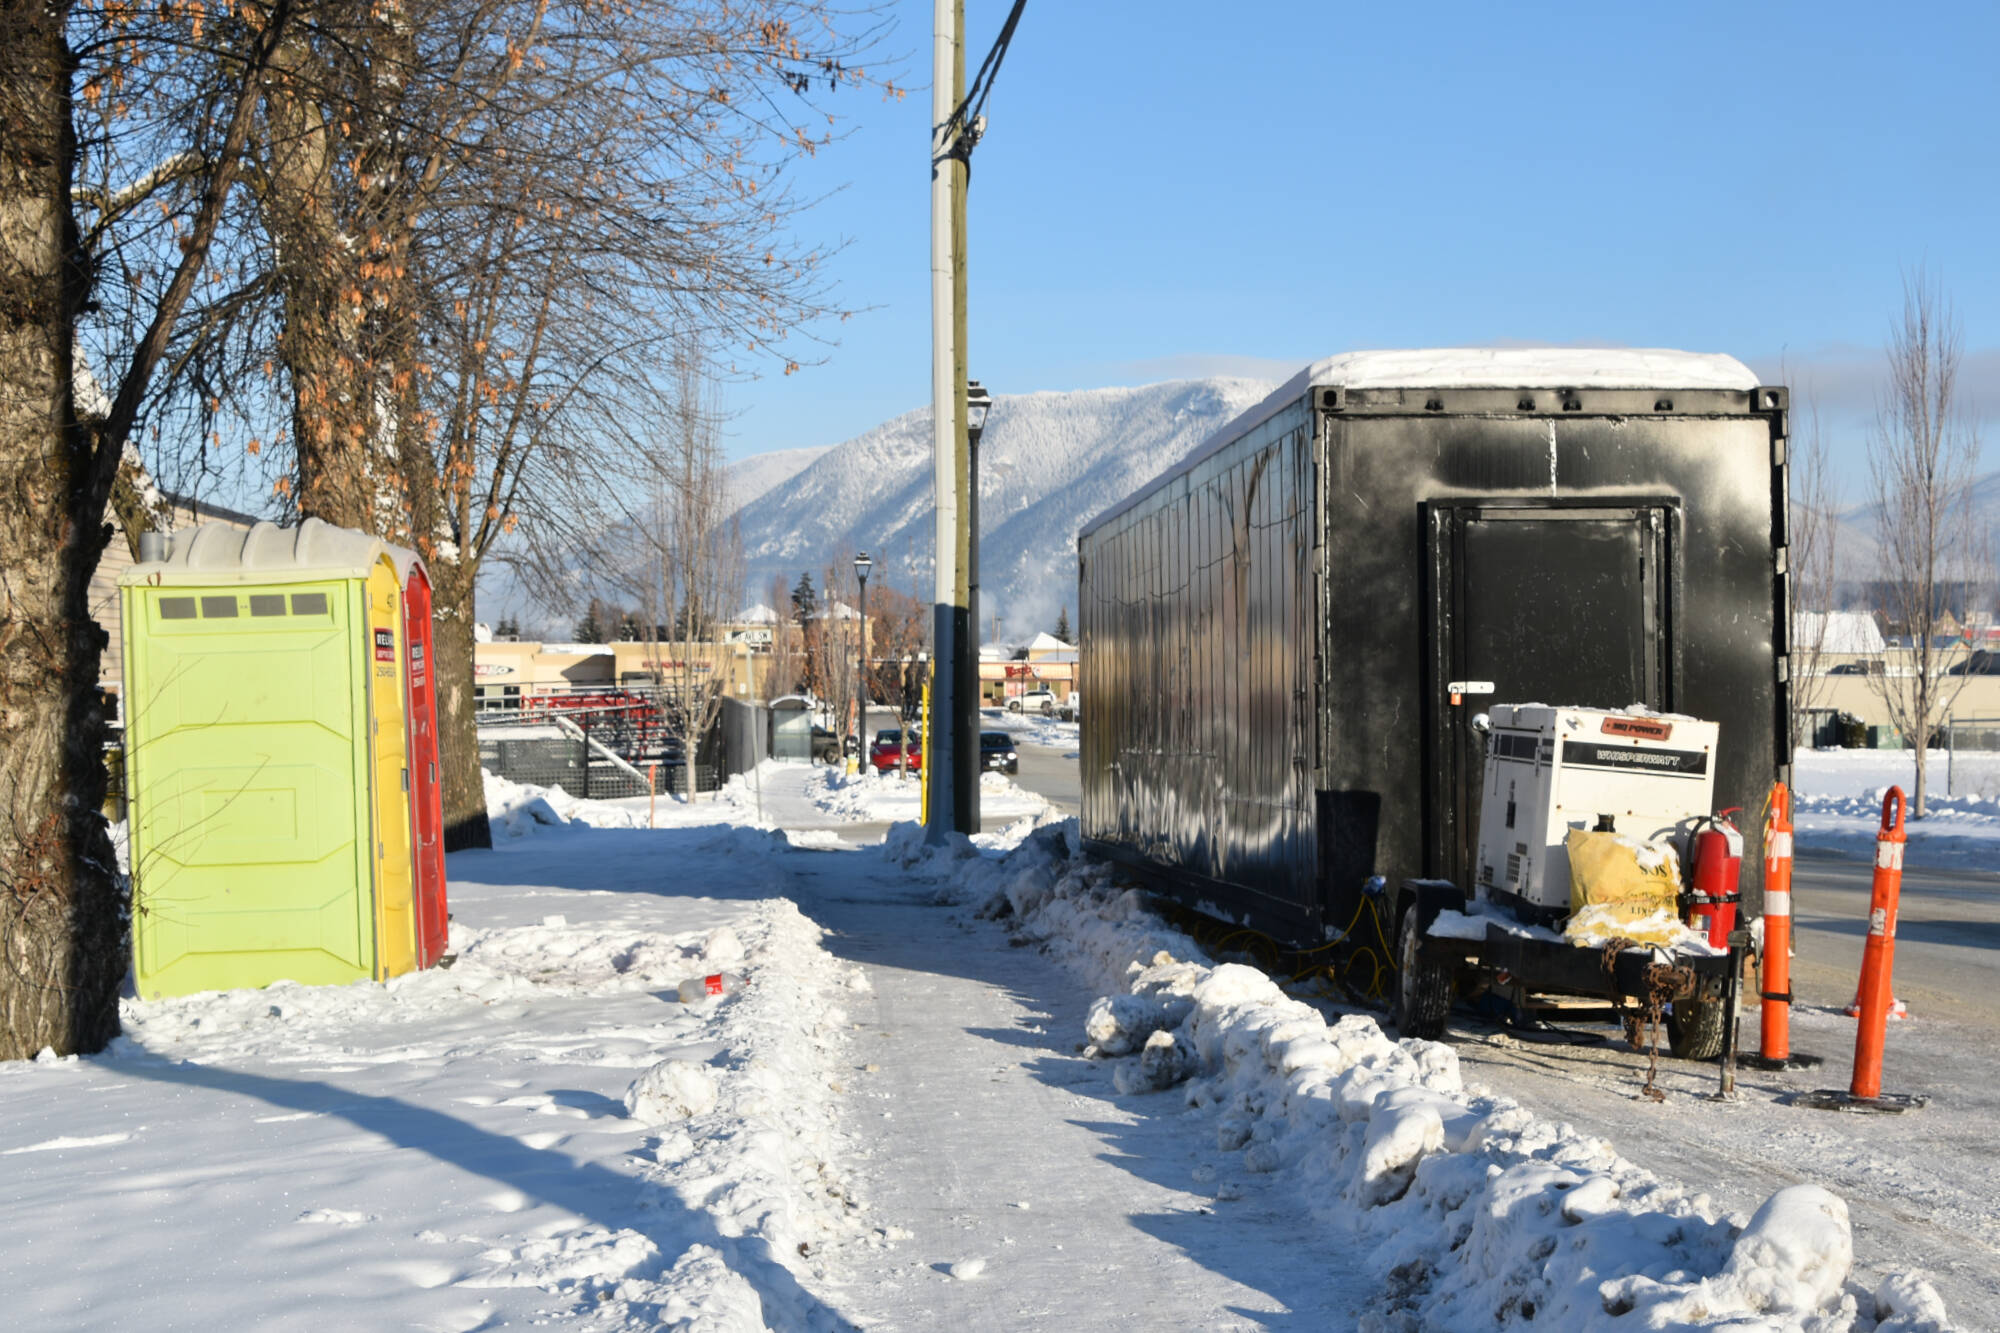 The new temporary winter shelter at the Downtown Activity Centre, 451 Shuswap St. S in Salmon Arm, opened seven days a week, 8 p.m. to 6 a.m., starting Jan. 19 to mid-April. (Martha Wickett/Salmon Arm Observer)A sea can, along with two porta potties, was set up along 3rd Street SW on Dec. 20, 2022 and removed Jan. 20, 2023 after the shelter opened. (File photo)